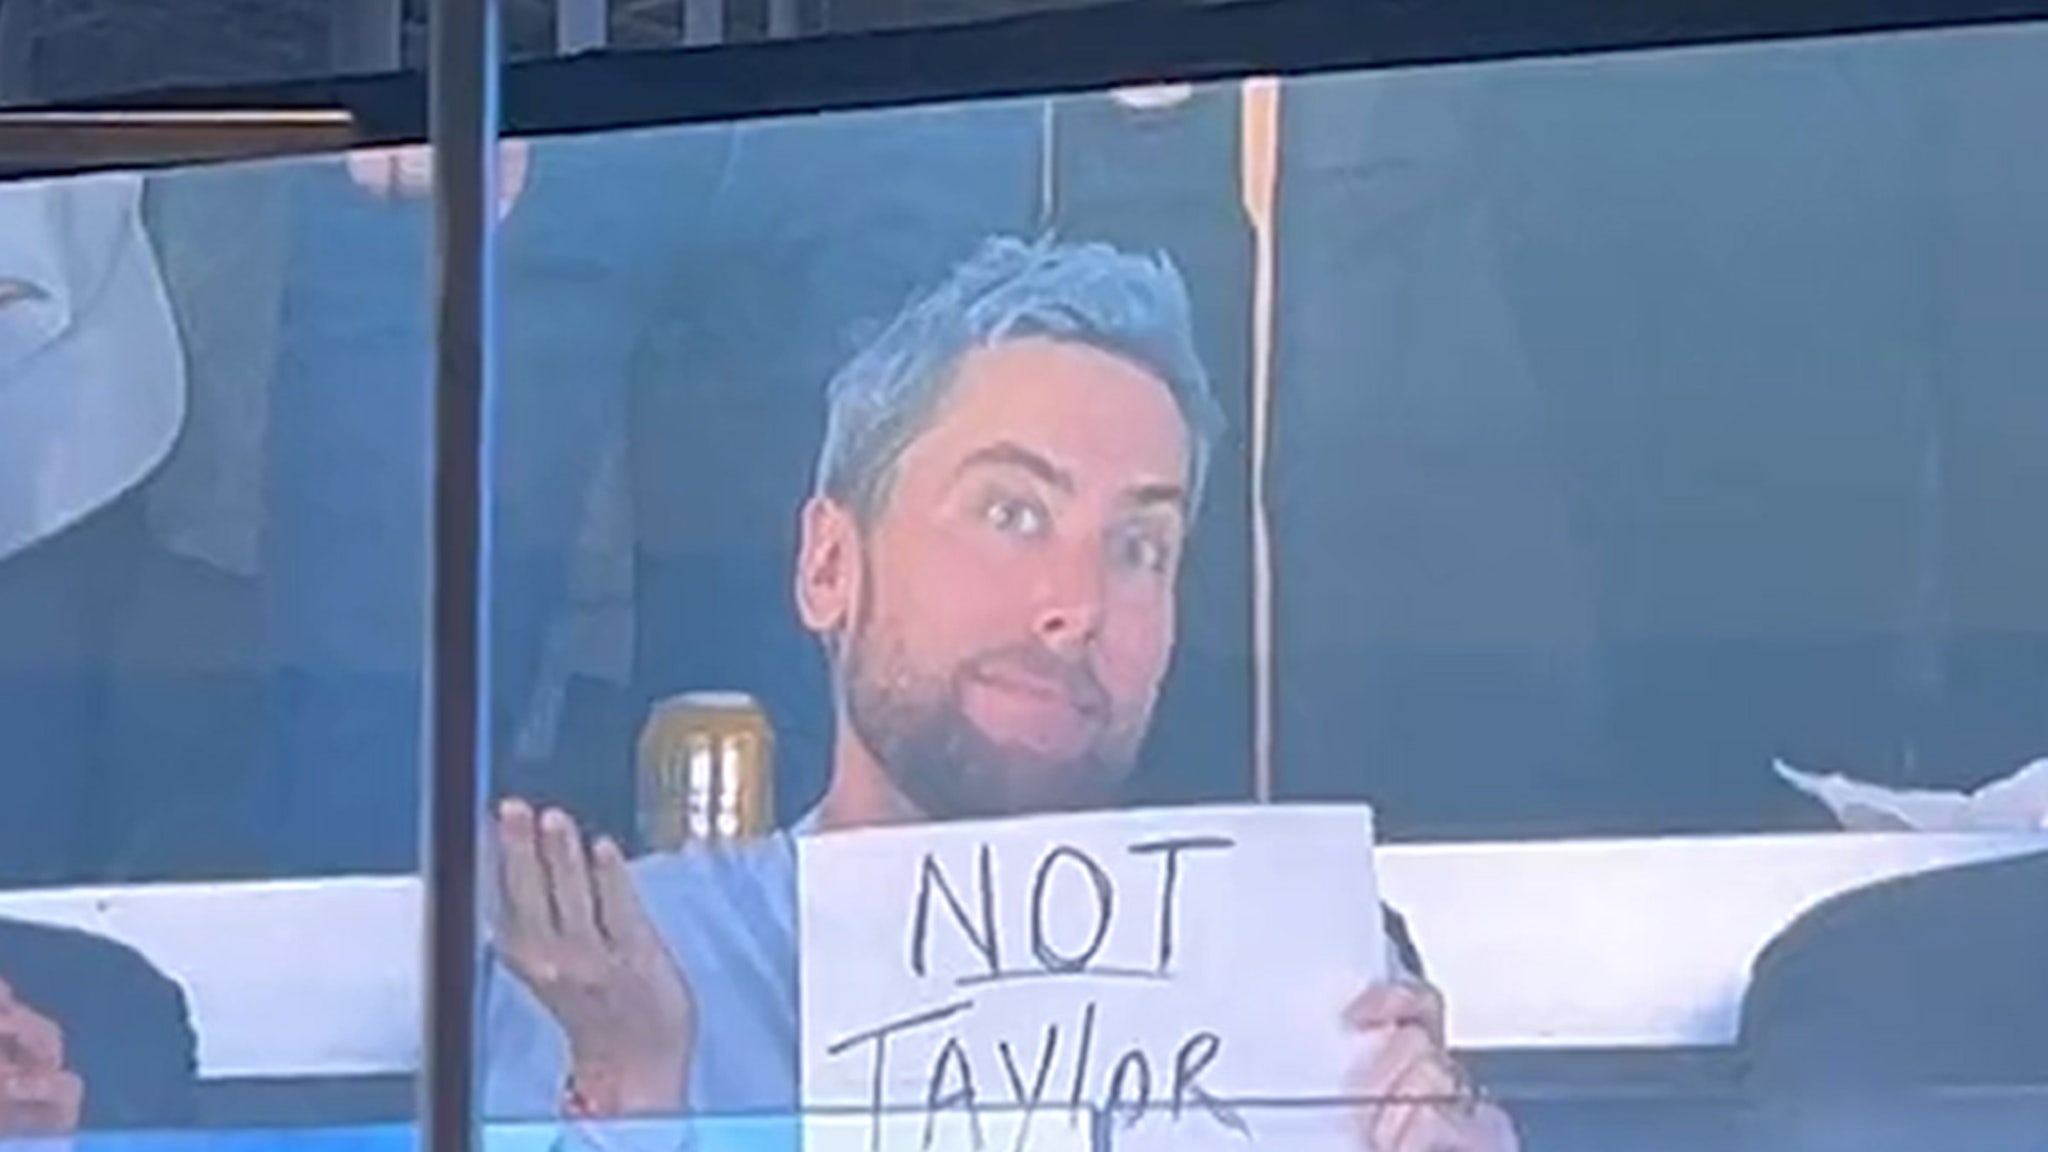 Lance Bass Trolls NFL with ‘Not Taylor Swift’ Sign During Chargers Game